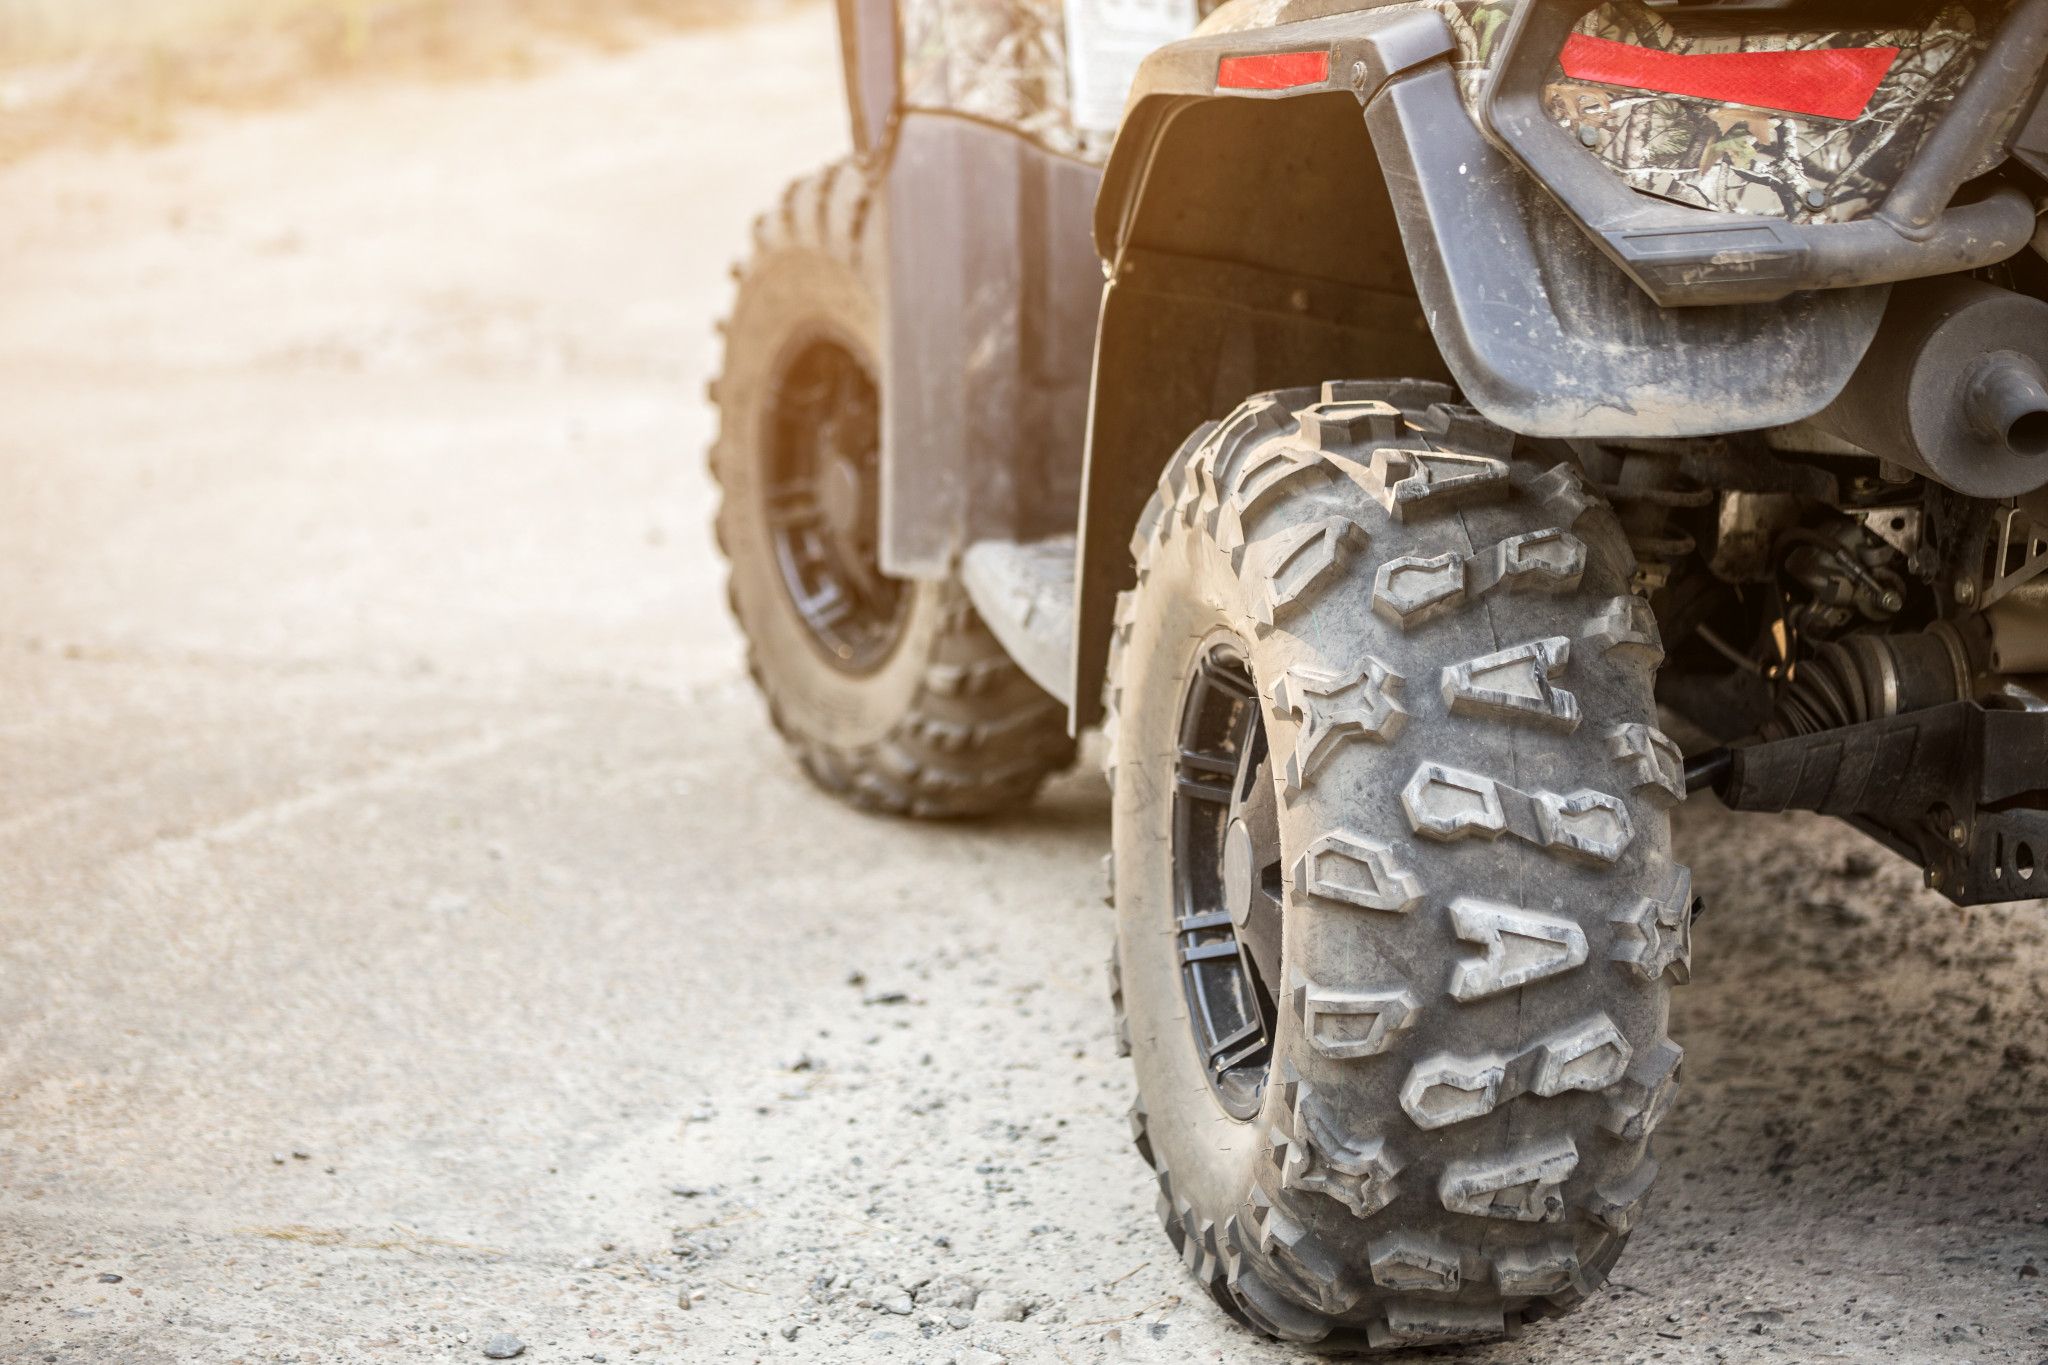 A close-up image of an ATV's tires. 